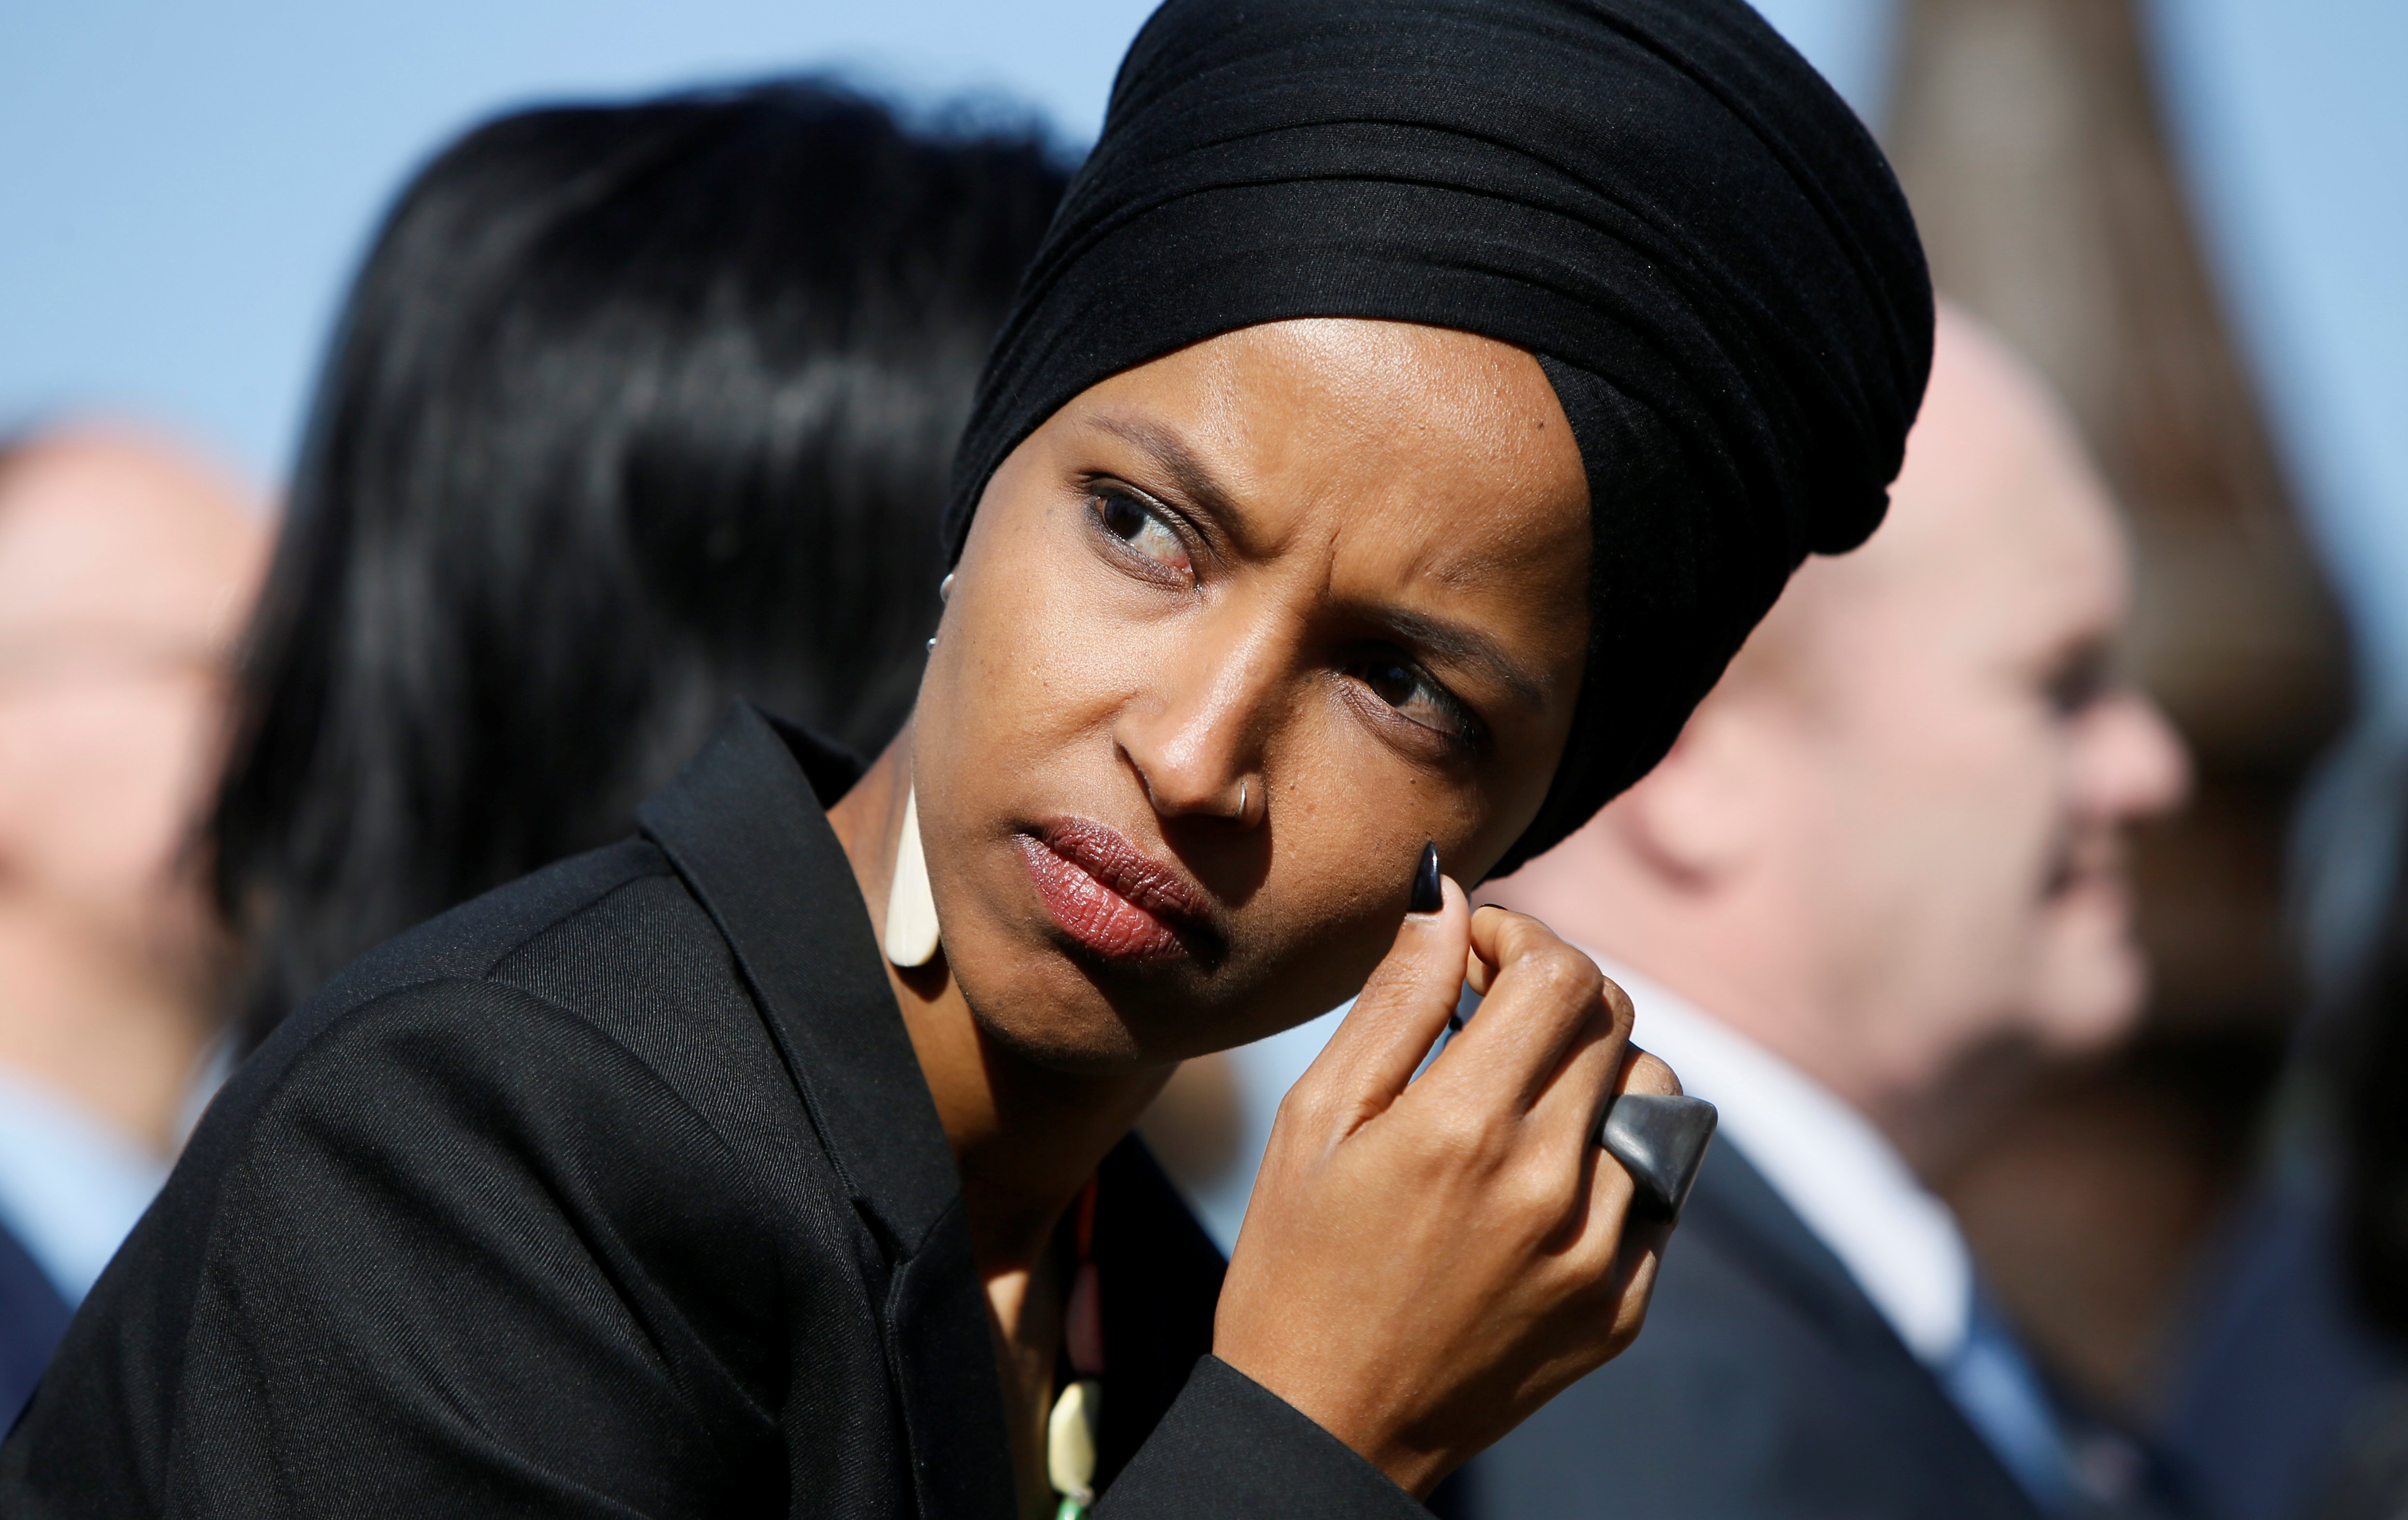 Rep. Ilhan Omar (D-MN) participates in a news conference by members of the U.S. Congress "to announce legislation to repeal President Trump’s existing executive order blocking travel from majority Muslim countries" outside the U.S. Capitol in Washington, U.S., April 10, 2019. REUTERS/Jim Bourg 